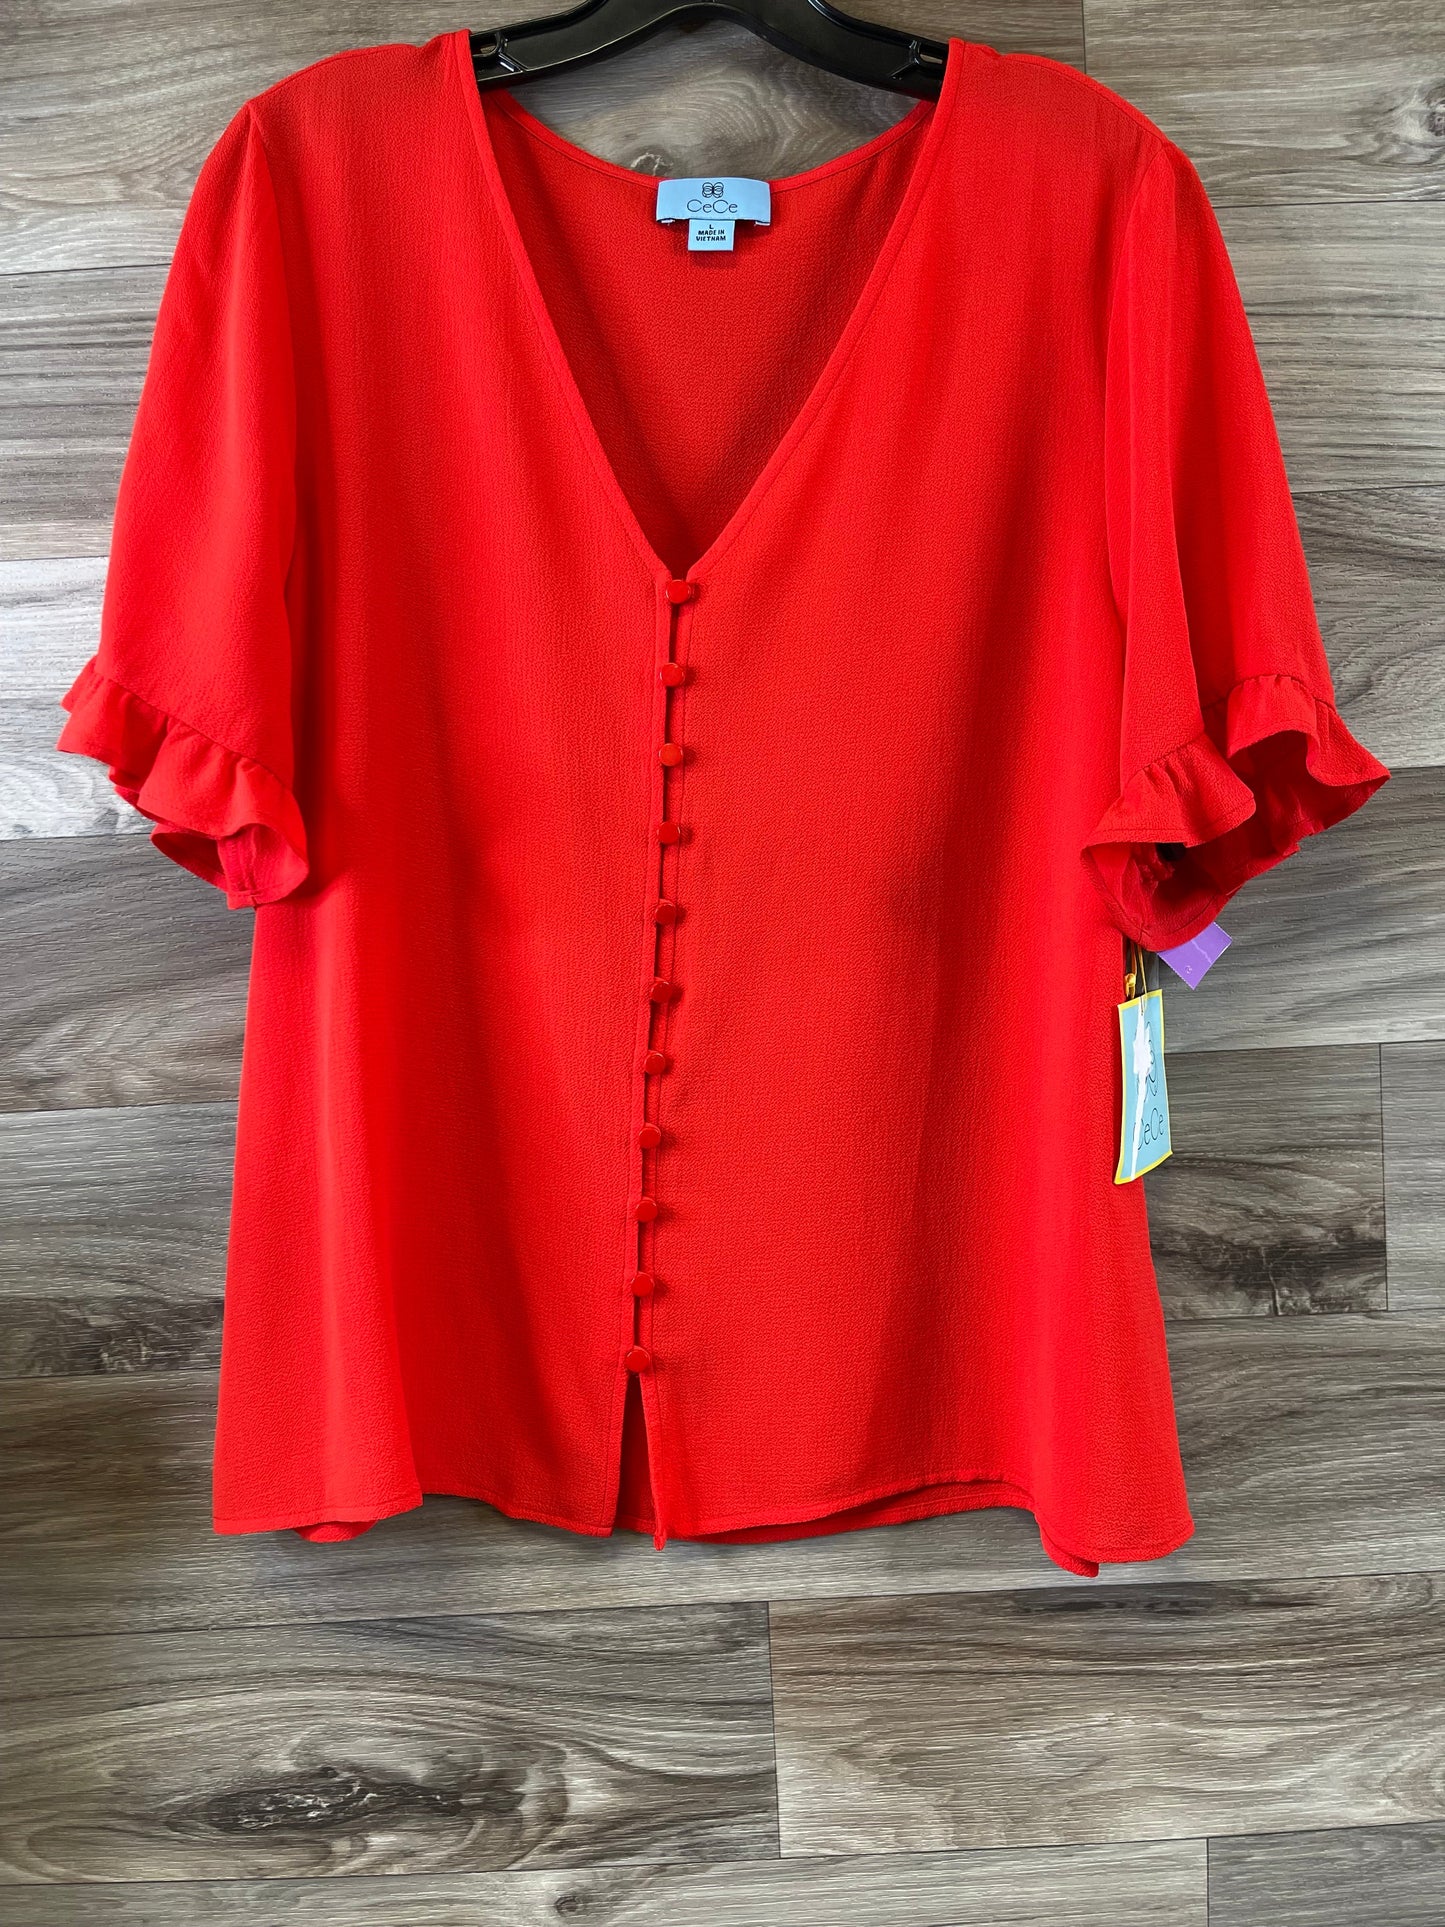 Red Top Short Sleeve Cece, Size Large